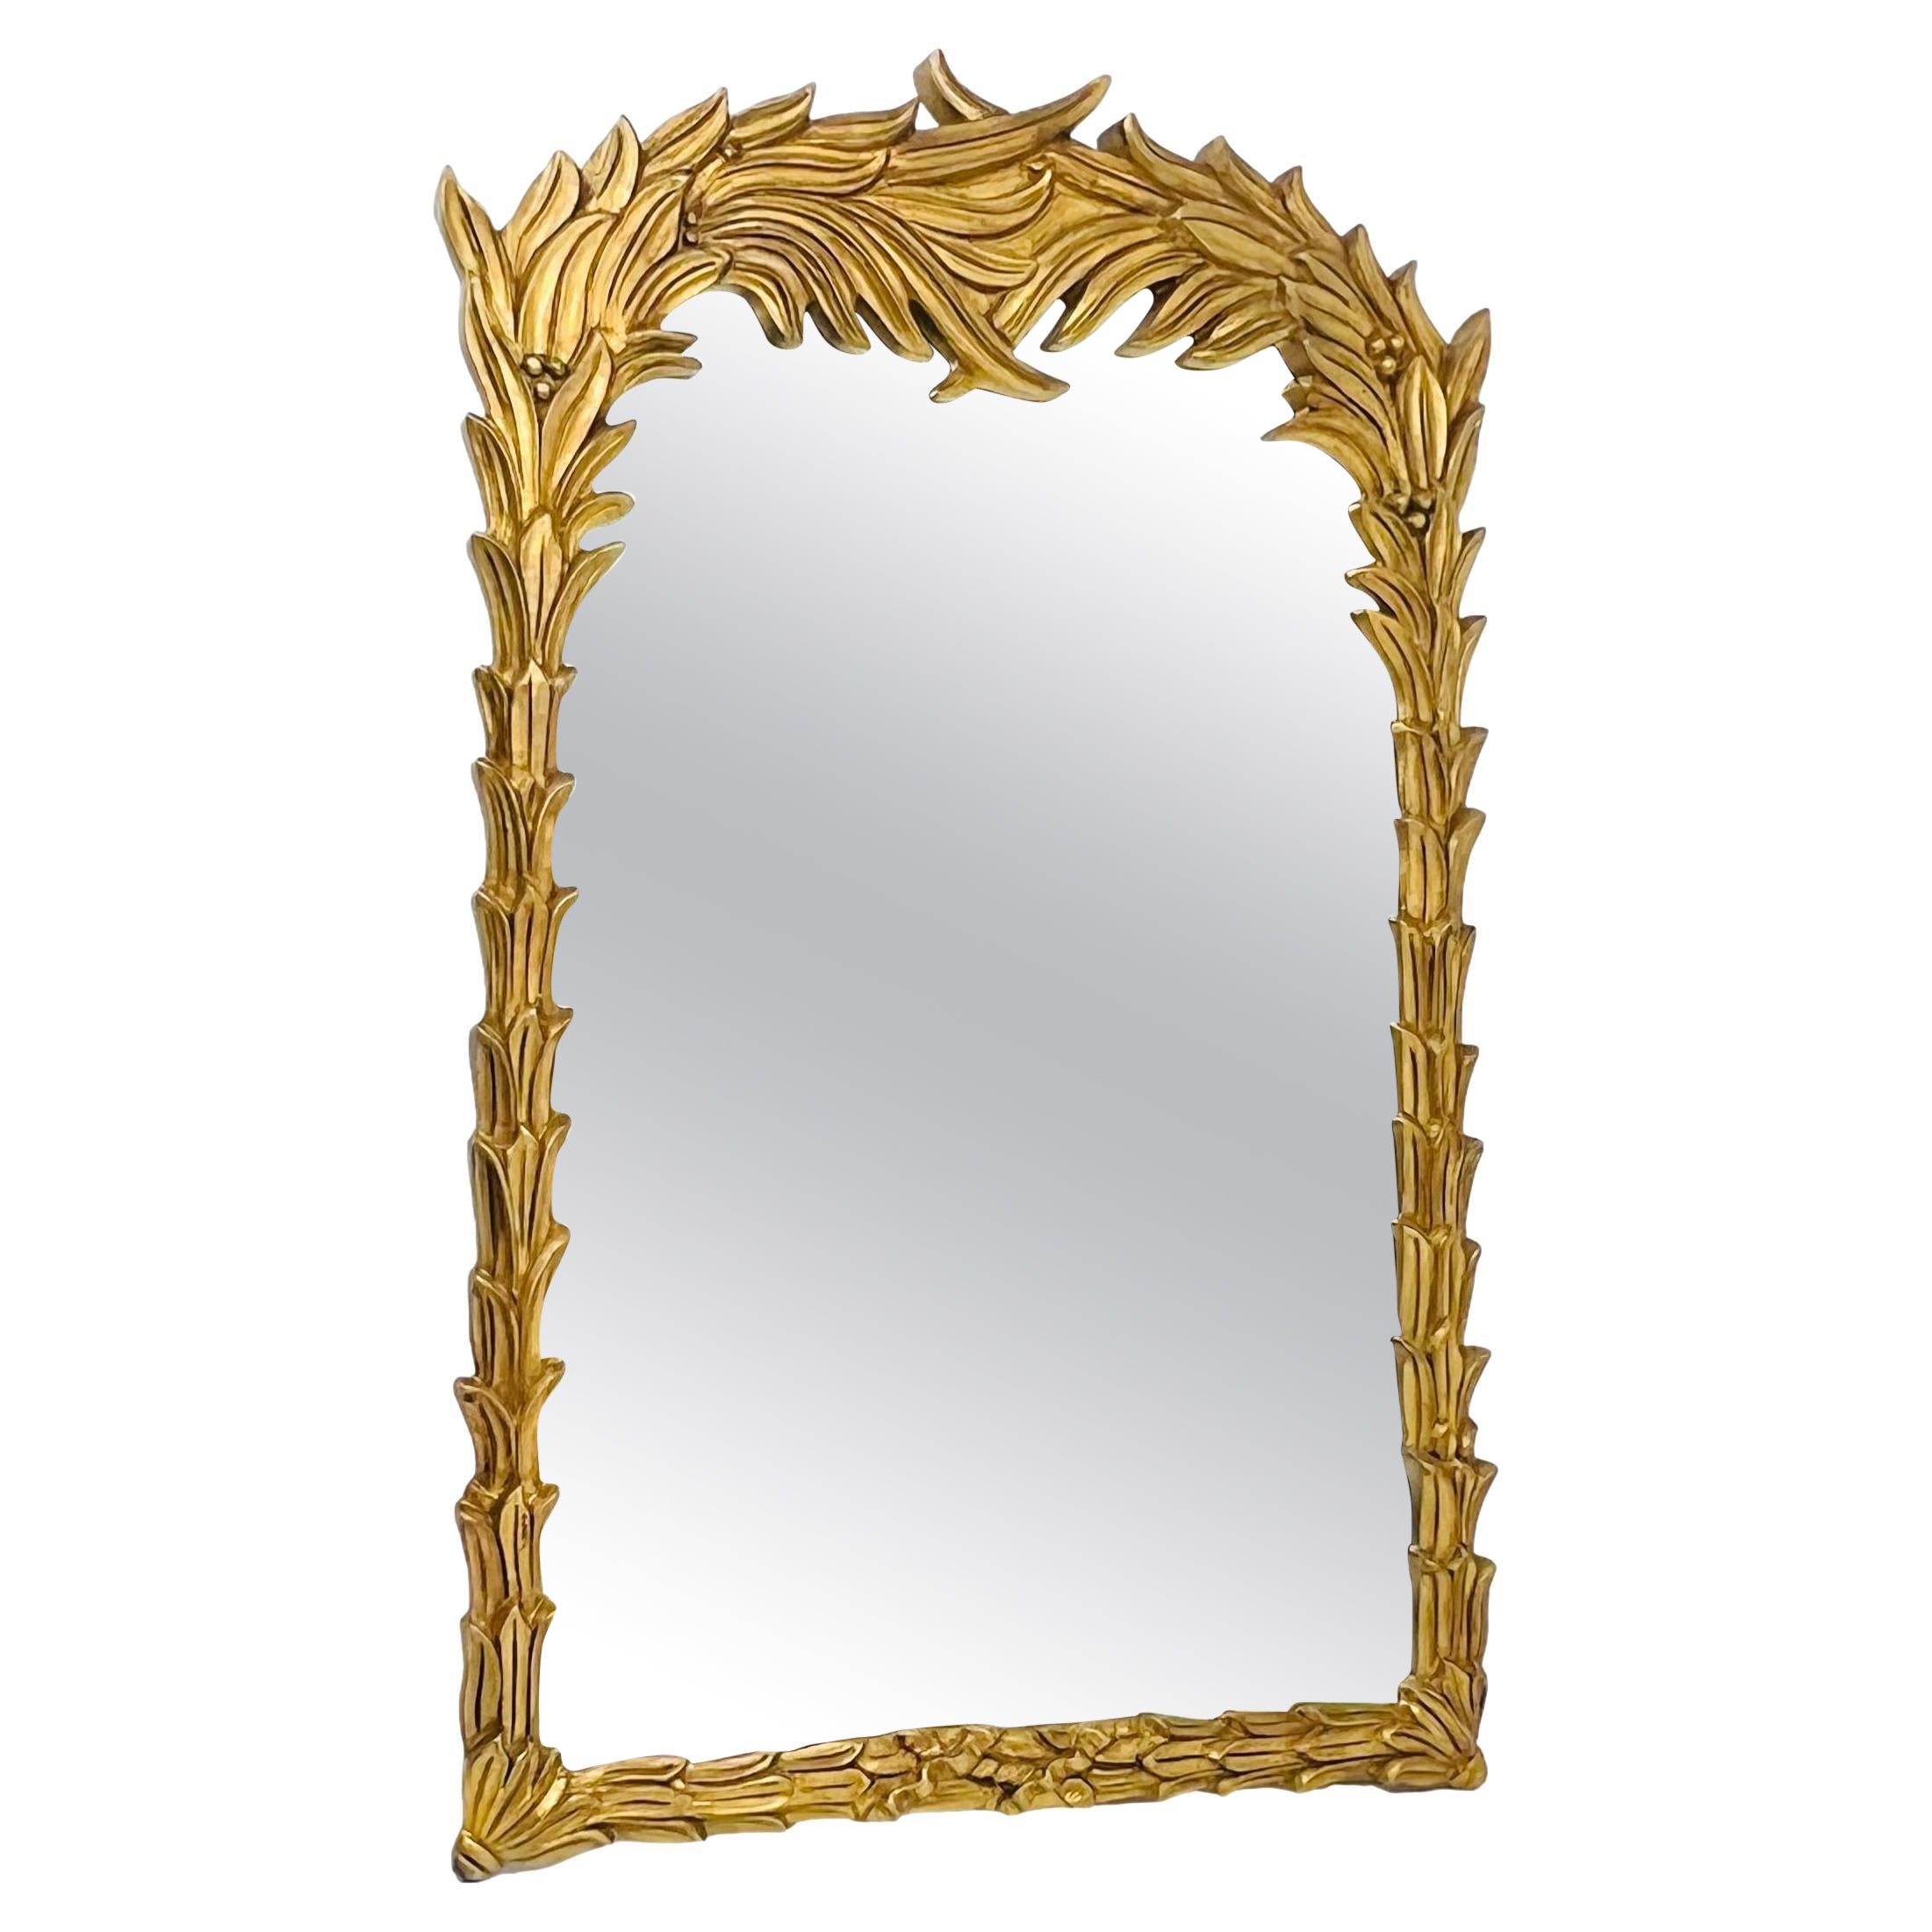 Gilded Wood Palm Frond Mirror in the Style of Serge Roche